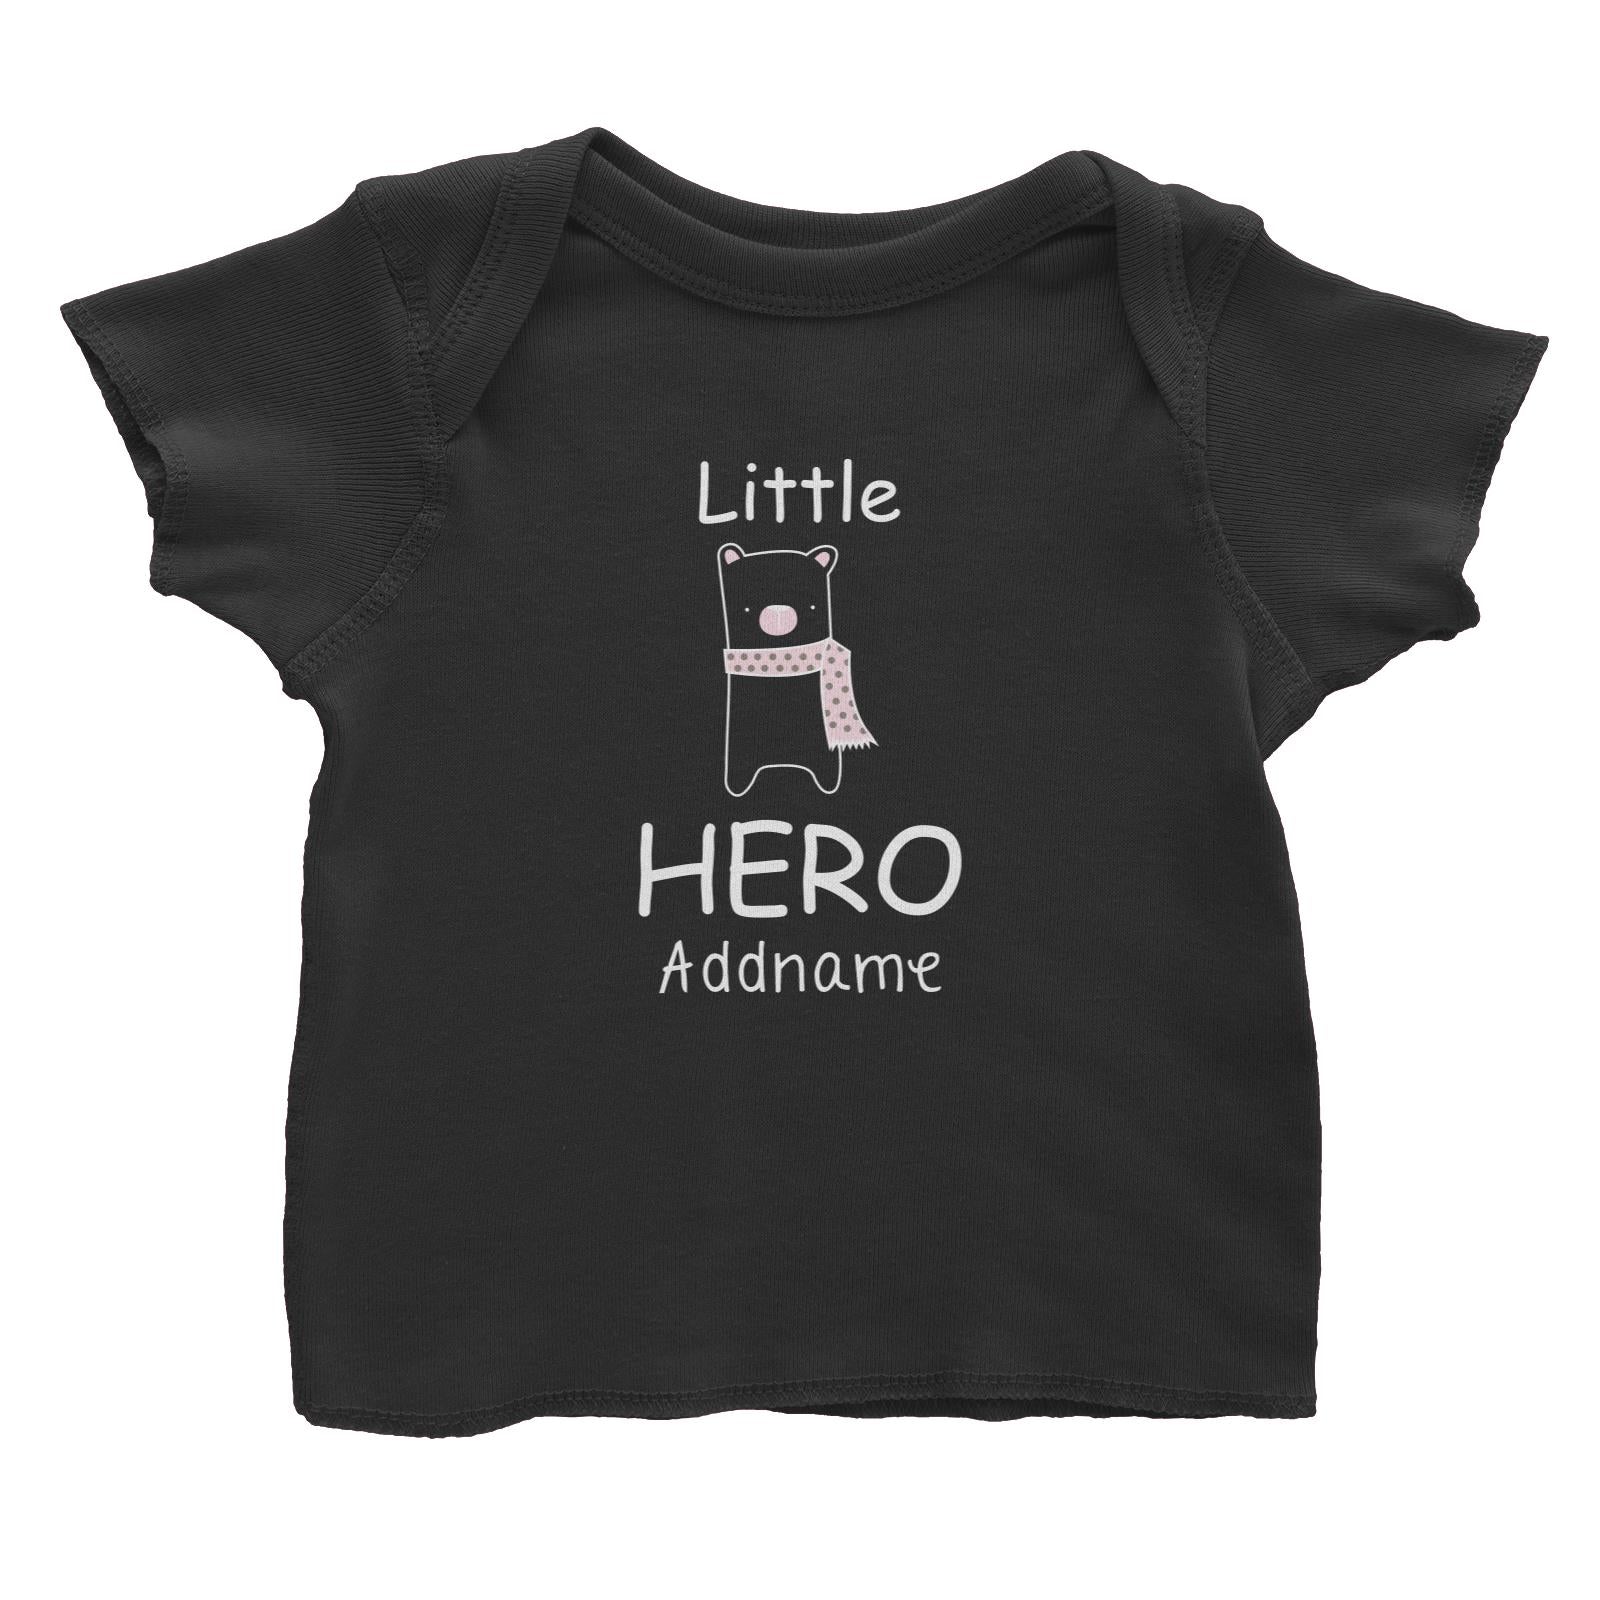 Cute Animals and Friends Series 2 Bear Little Hero Addname Baby T-Shirt